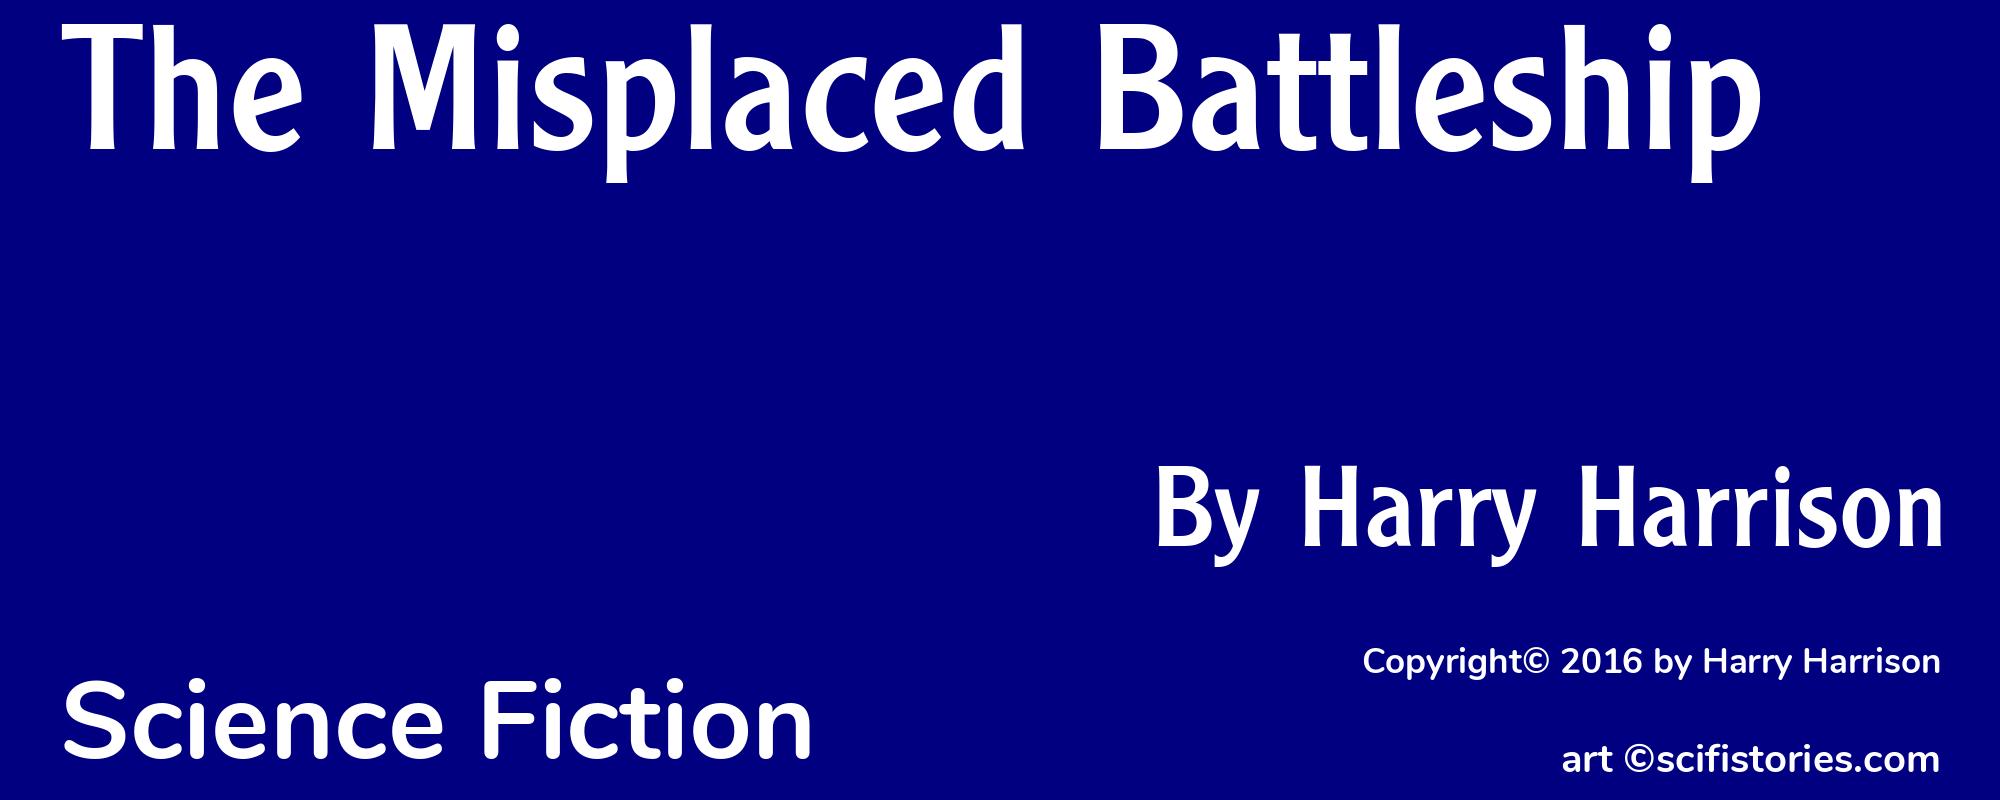 The Misplaced Battleship - Cover